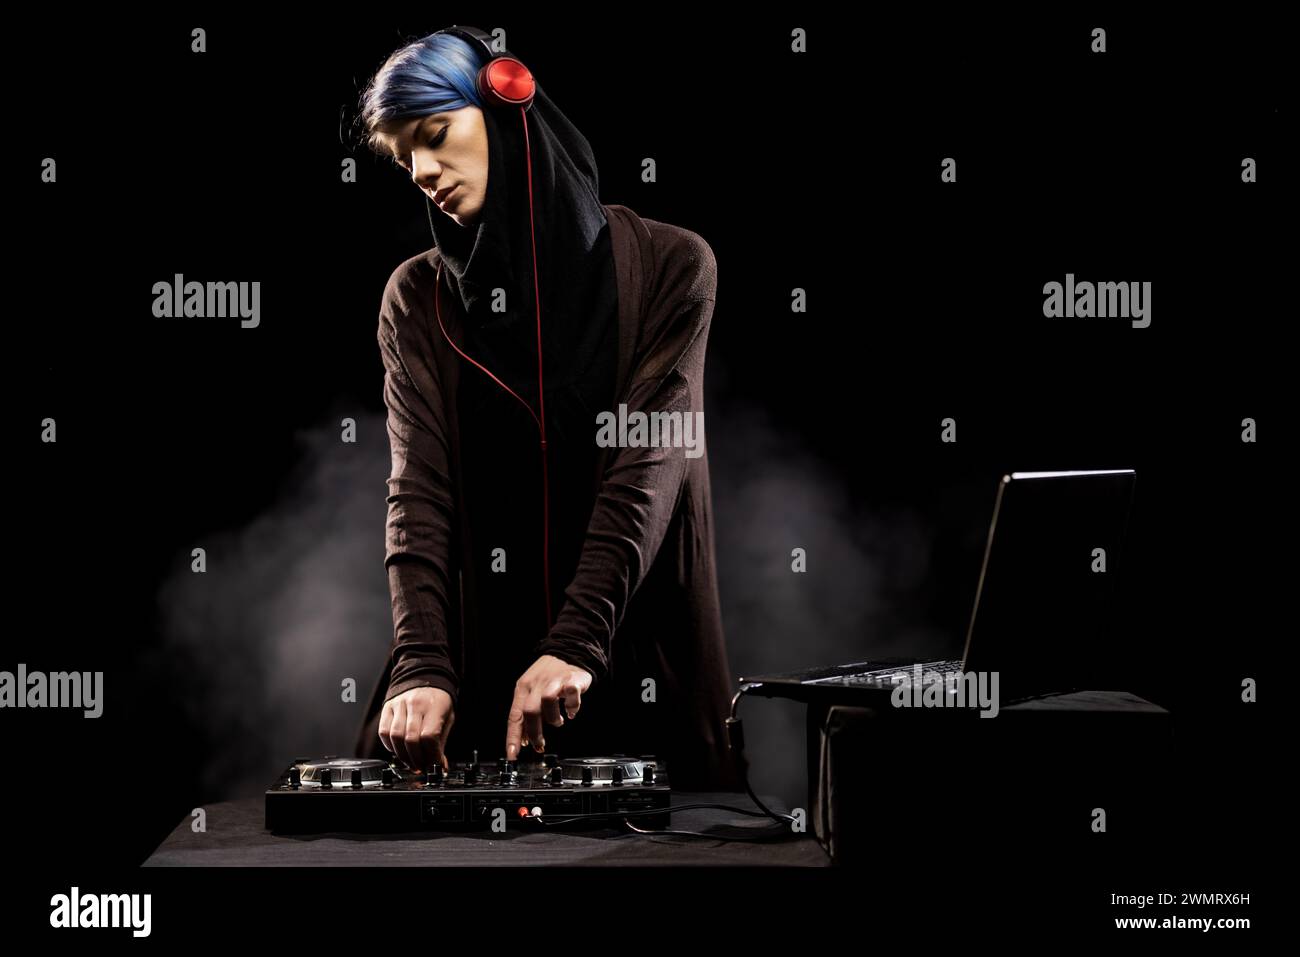 A woman wearing a hoodie is actively DJing music on a turntable. Smoke in the background Stock Photo